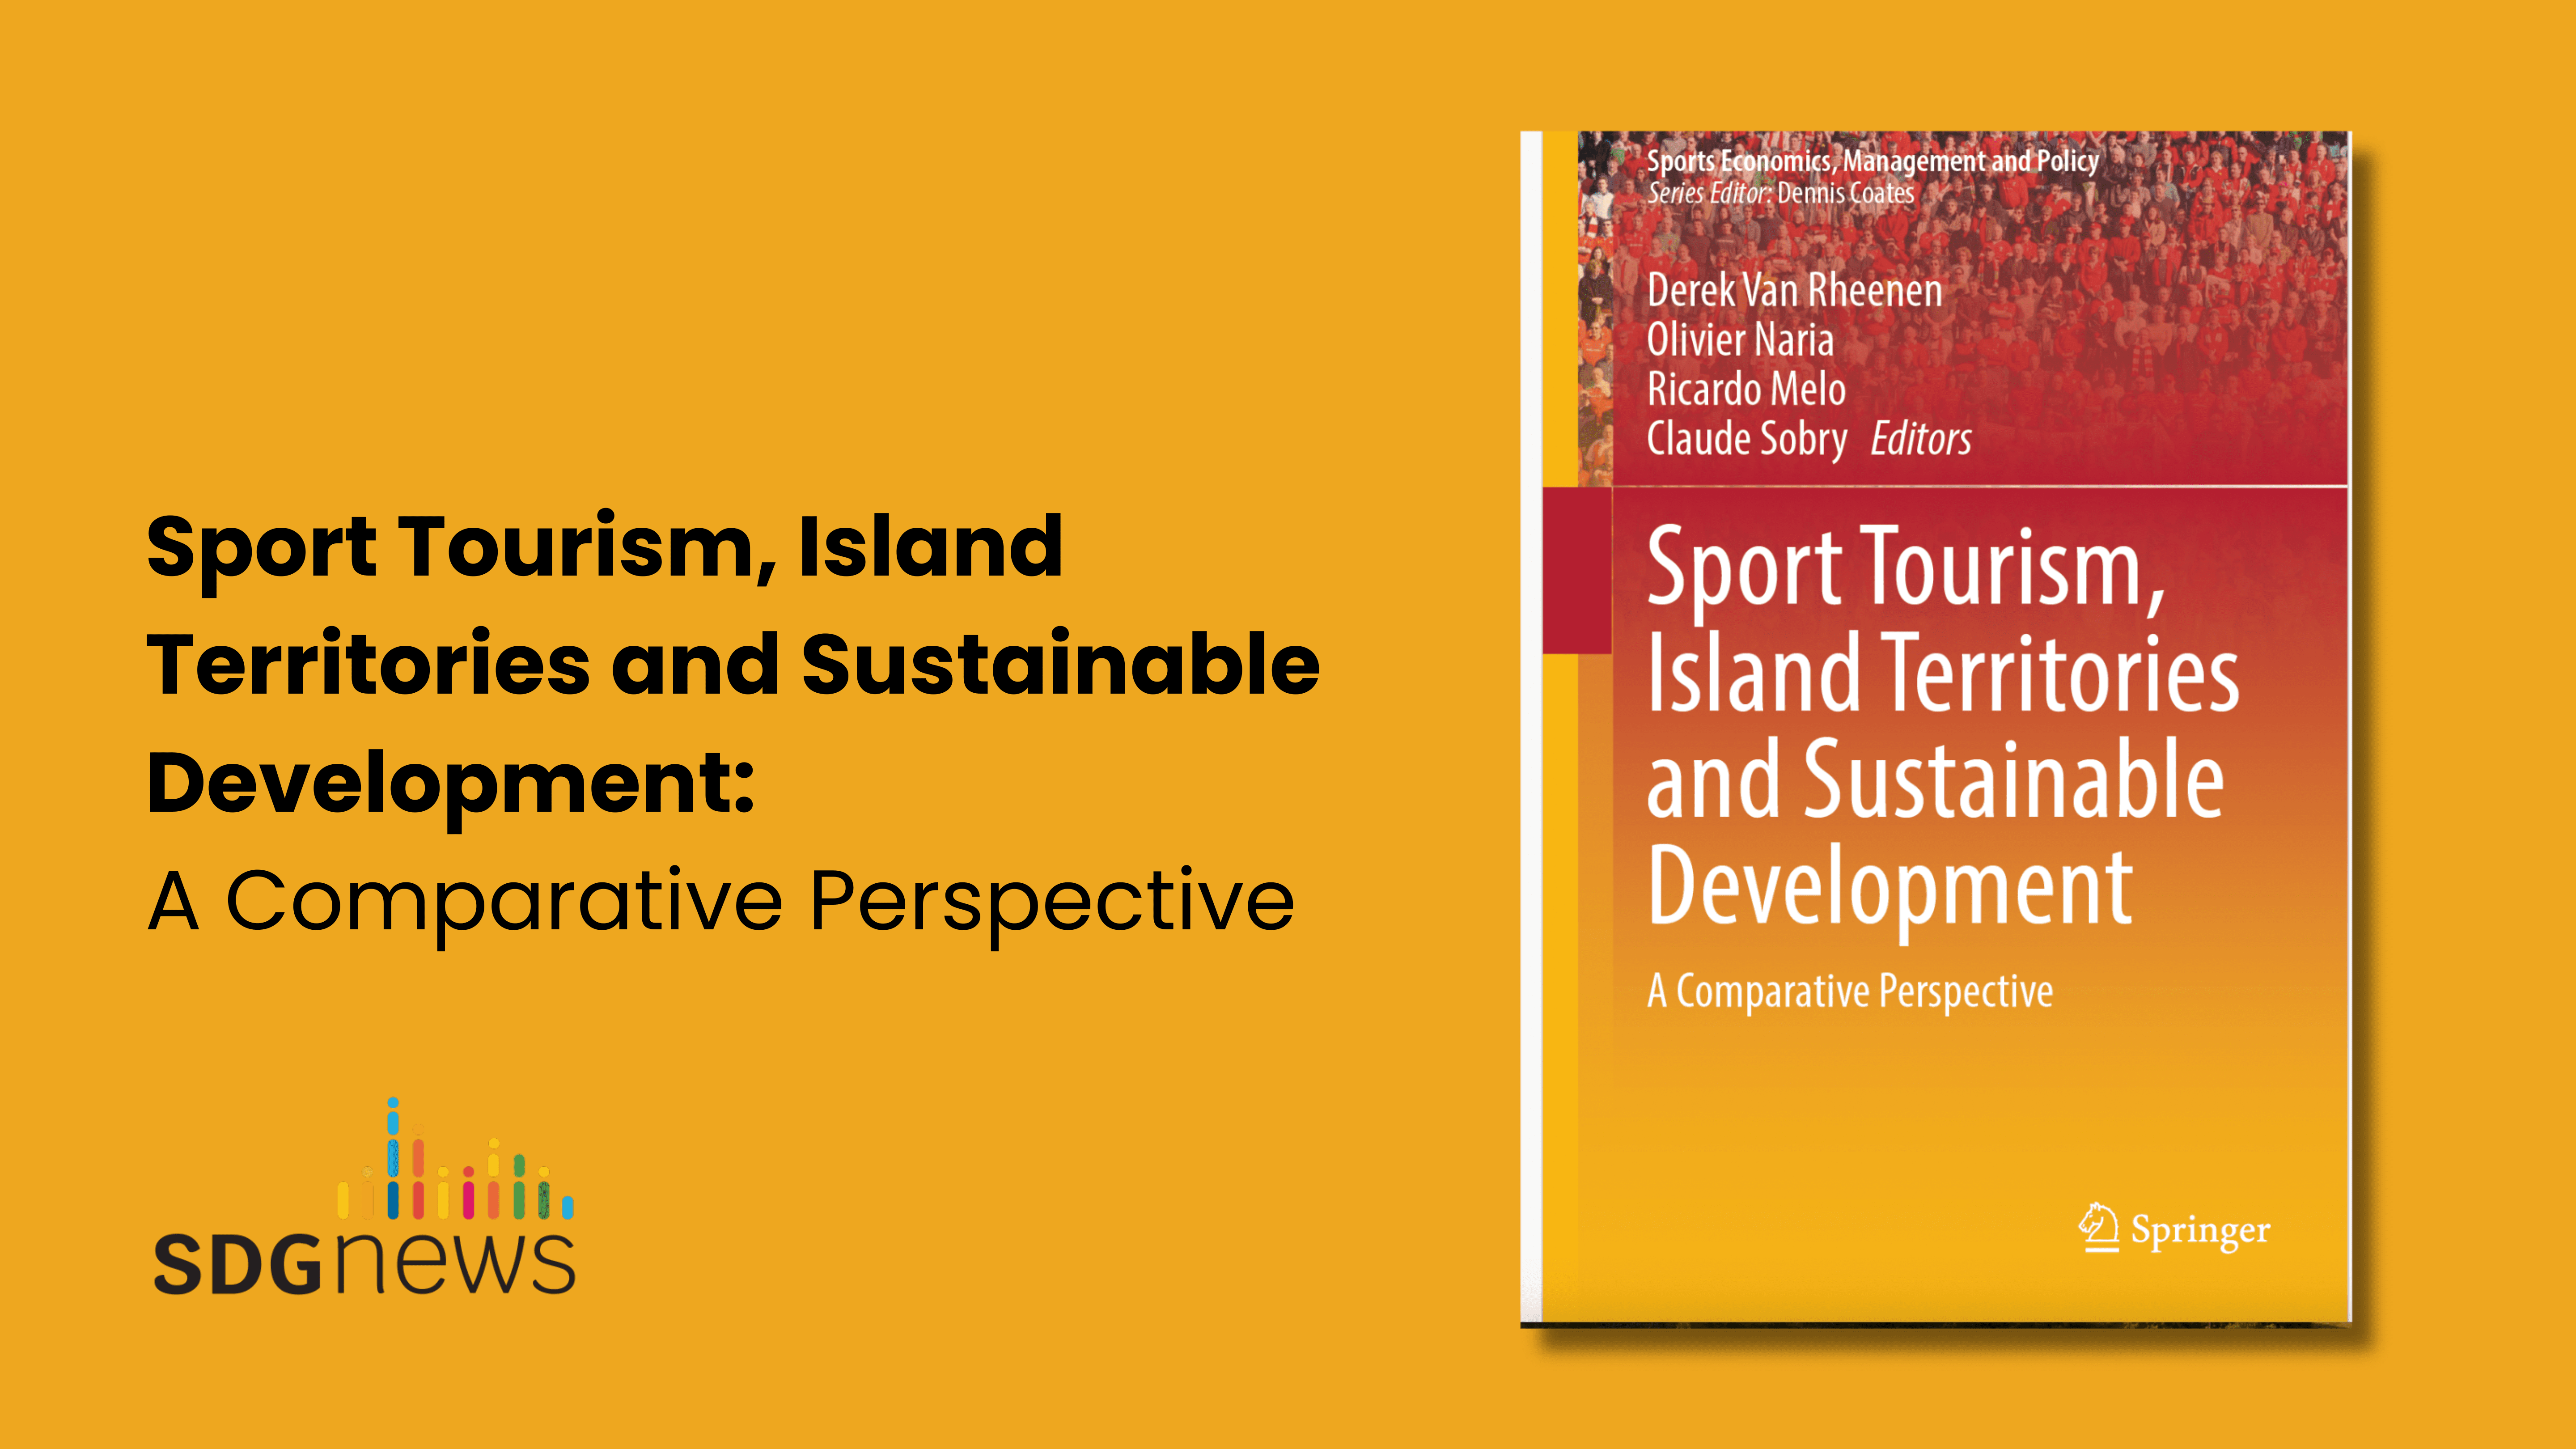 Sport Tourism, Island Territories and Sustainable Development- A Comparative Perspective